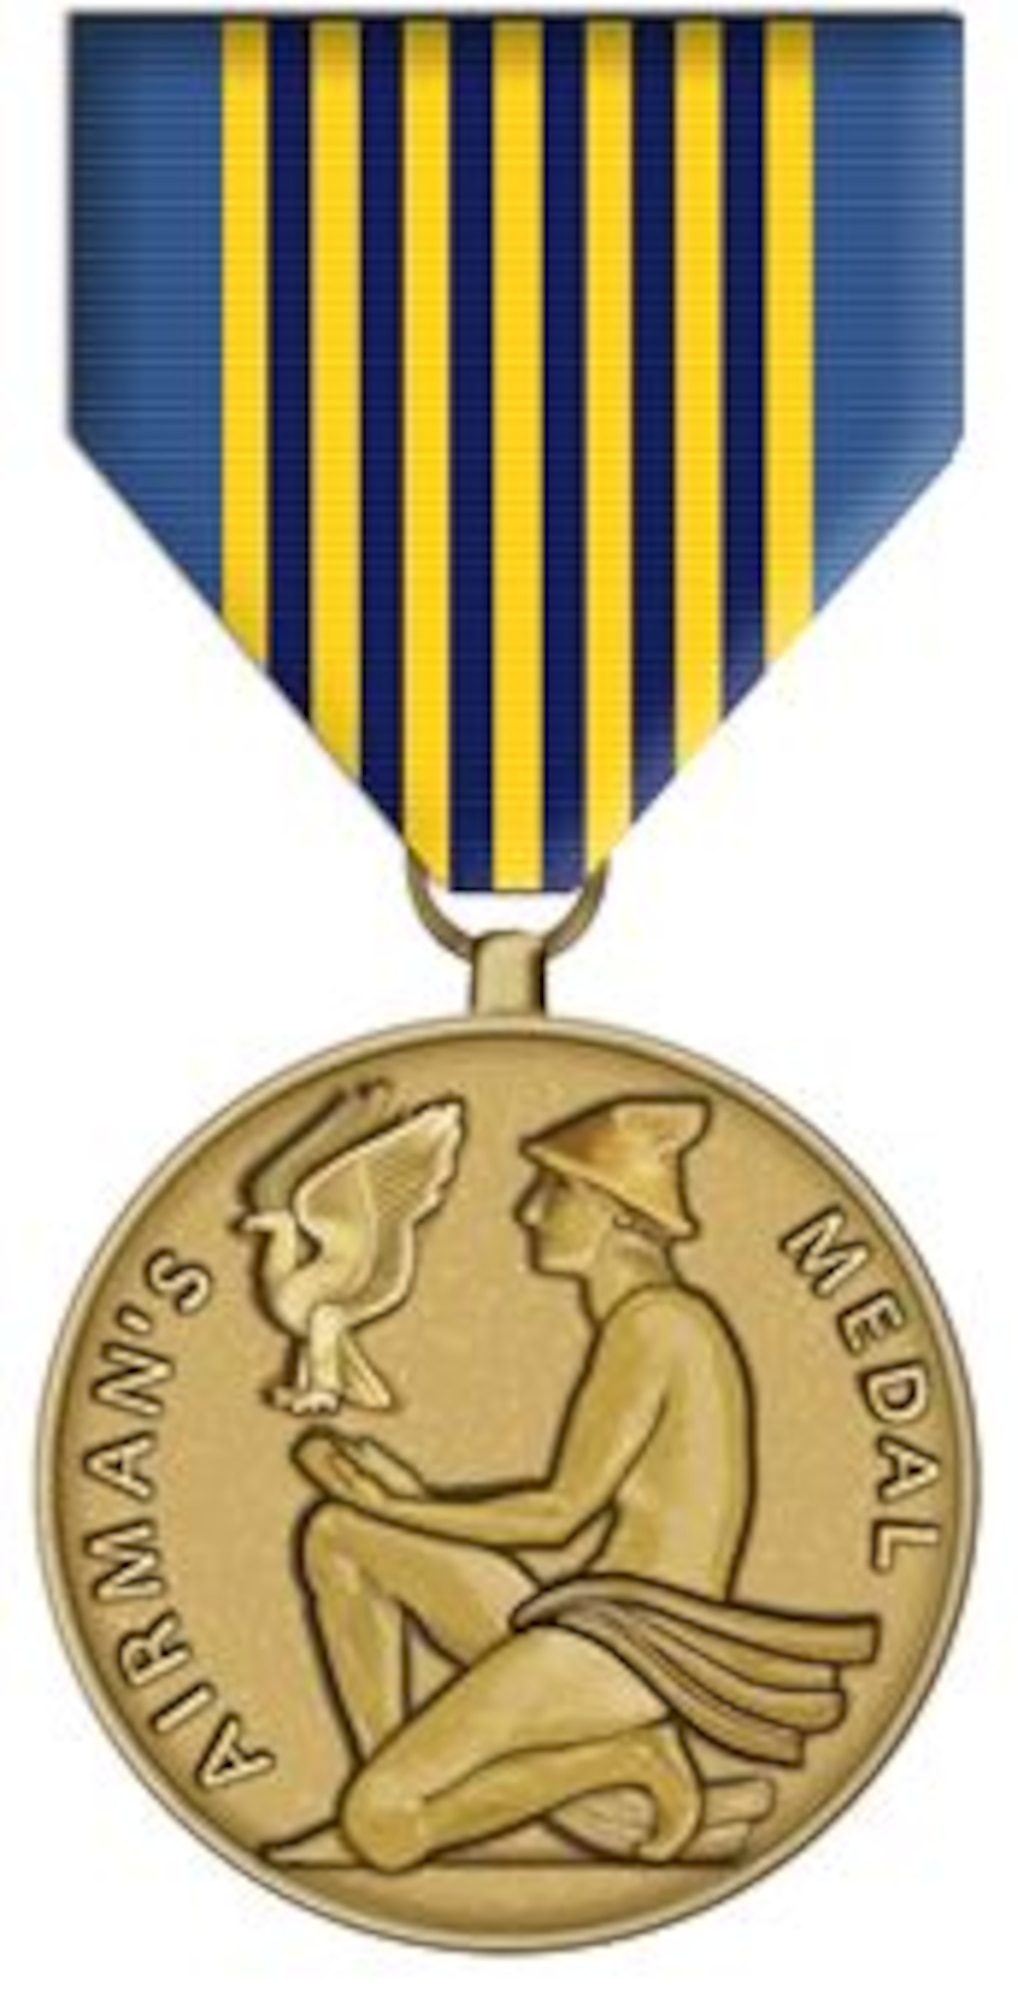 Airman's Medal.  Illustrated by Virginia Reyes of the Air Force News Agency. This image is 4x8 inches @ 200 ppi.  The Soldier's Medal was approved by Congress on July 2, 1926, and was amended by Congress on July 6, 1960, amending Title 10 of the United States Code to provide the Air Force with authority to present a distinctive version of the Soldiers Medal to be known as the "Airman's Medal."
